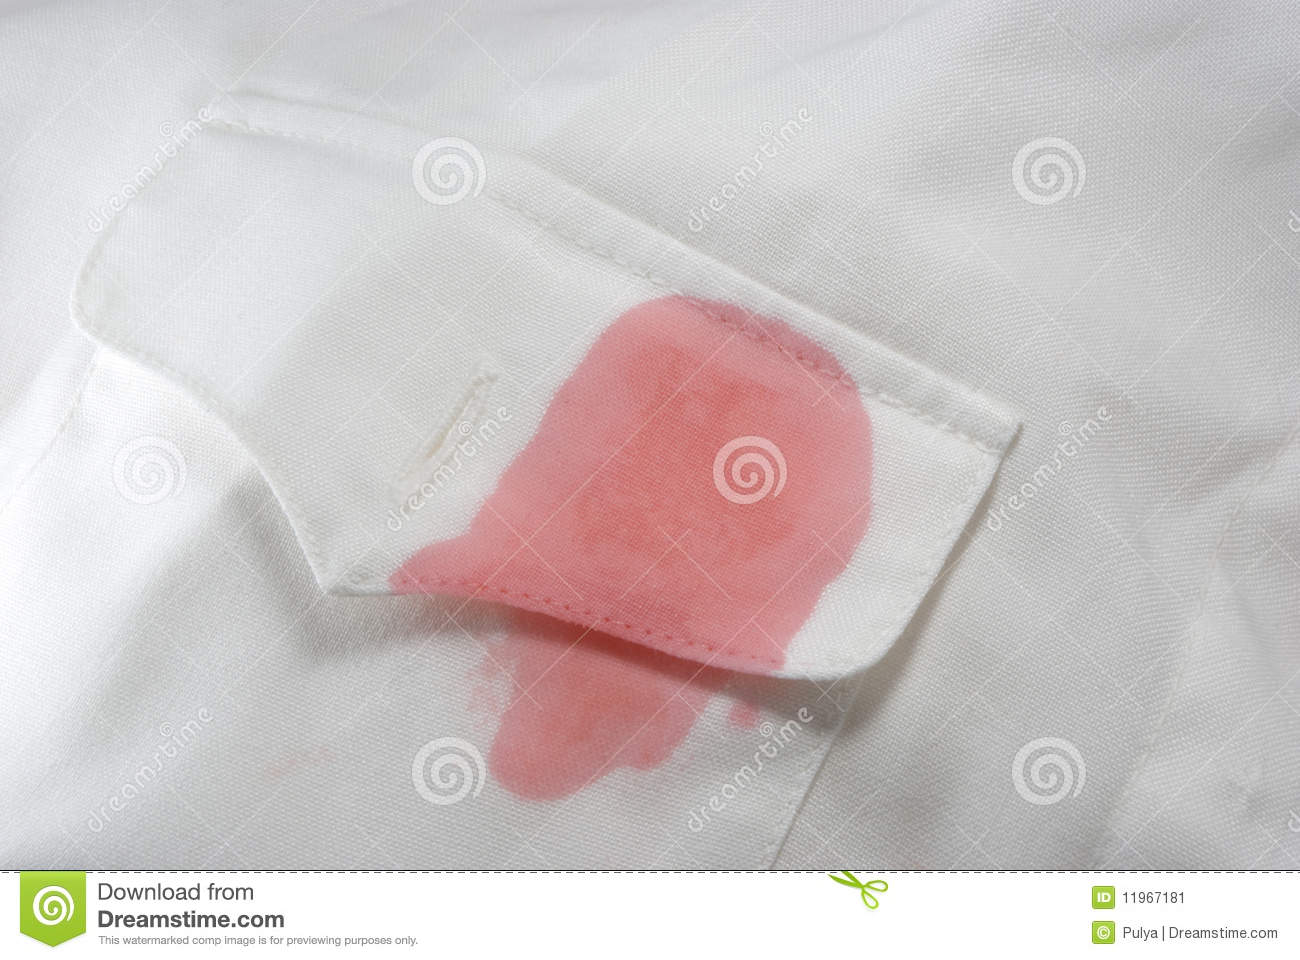 Stained Shirt Stock Image   Image  11967181